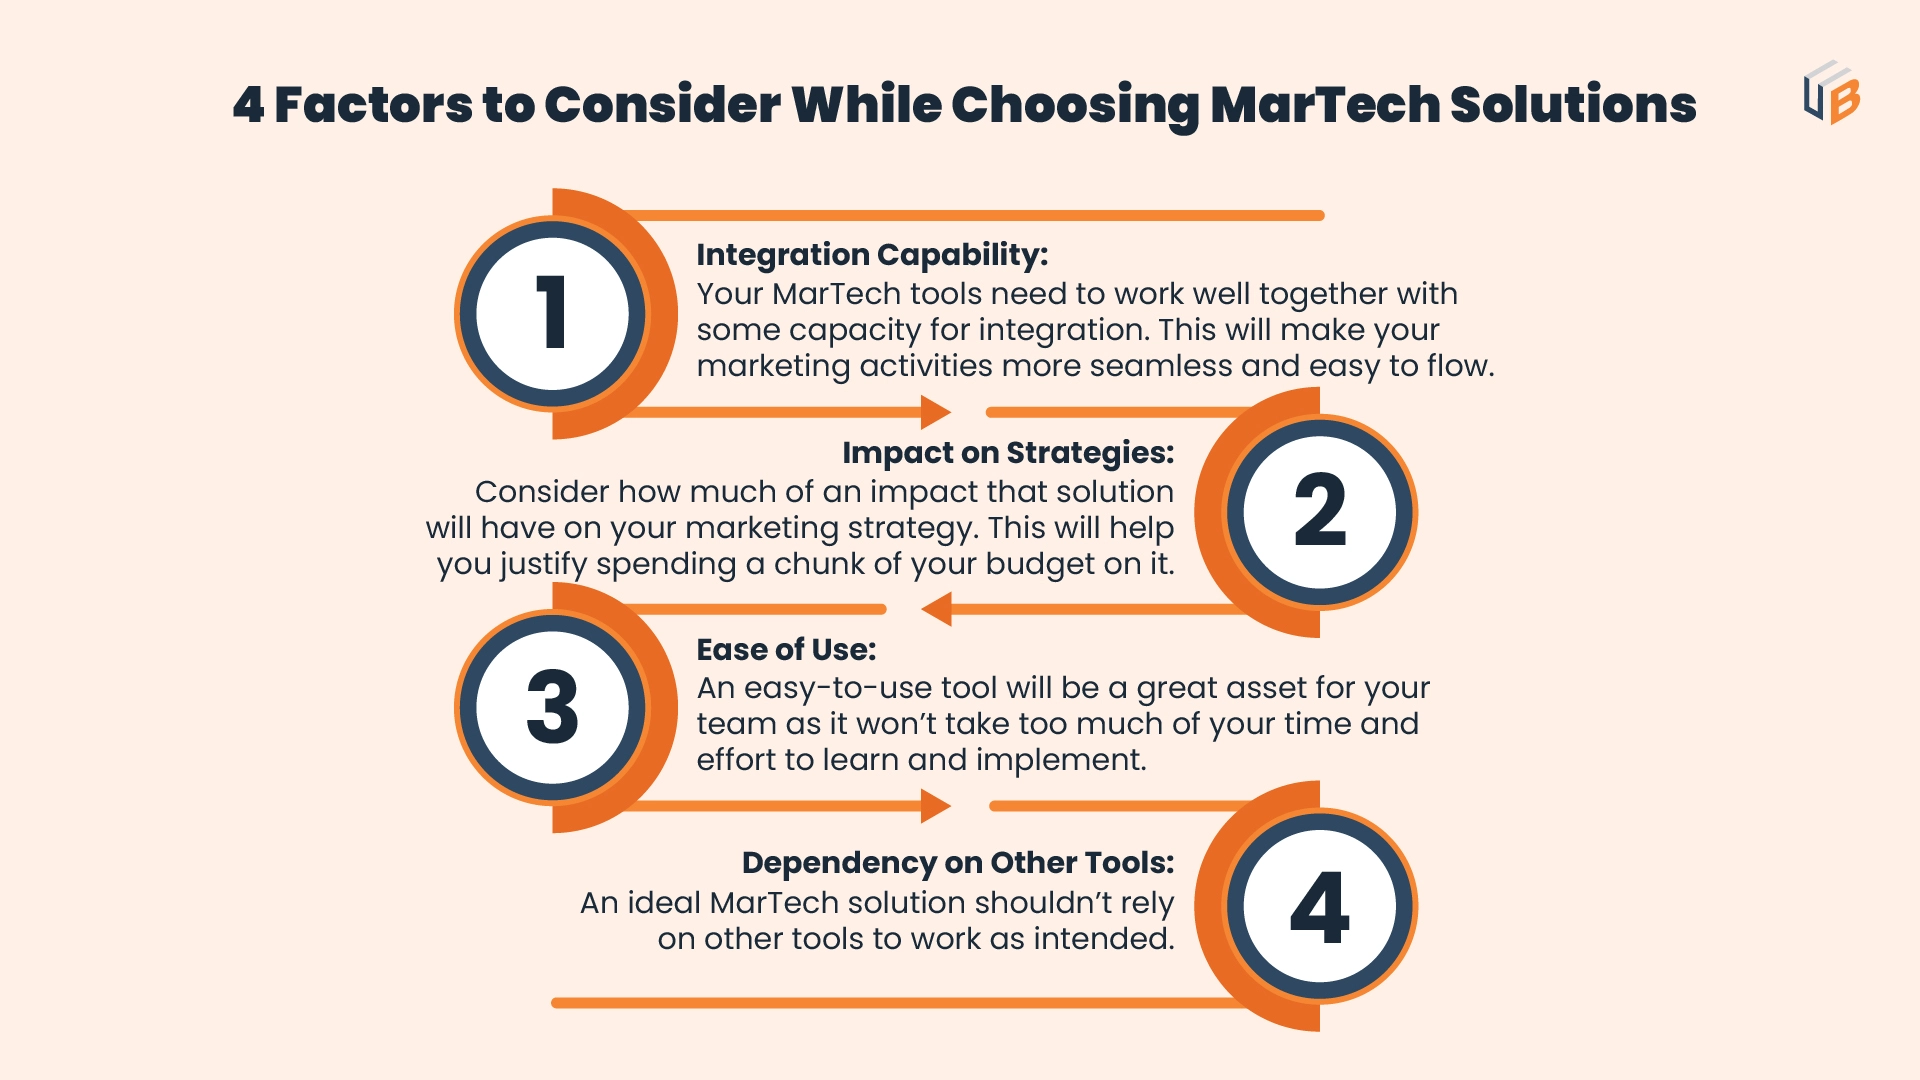 4 Factors to consider while choosing MarTech Solutions